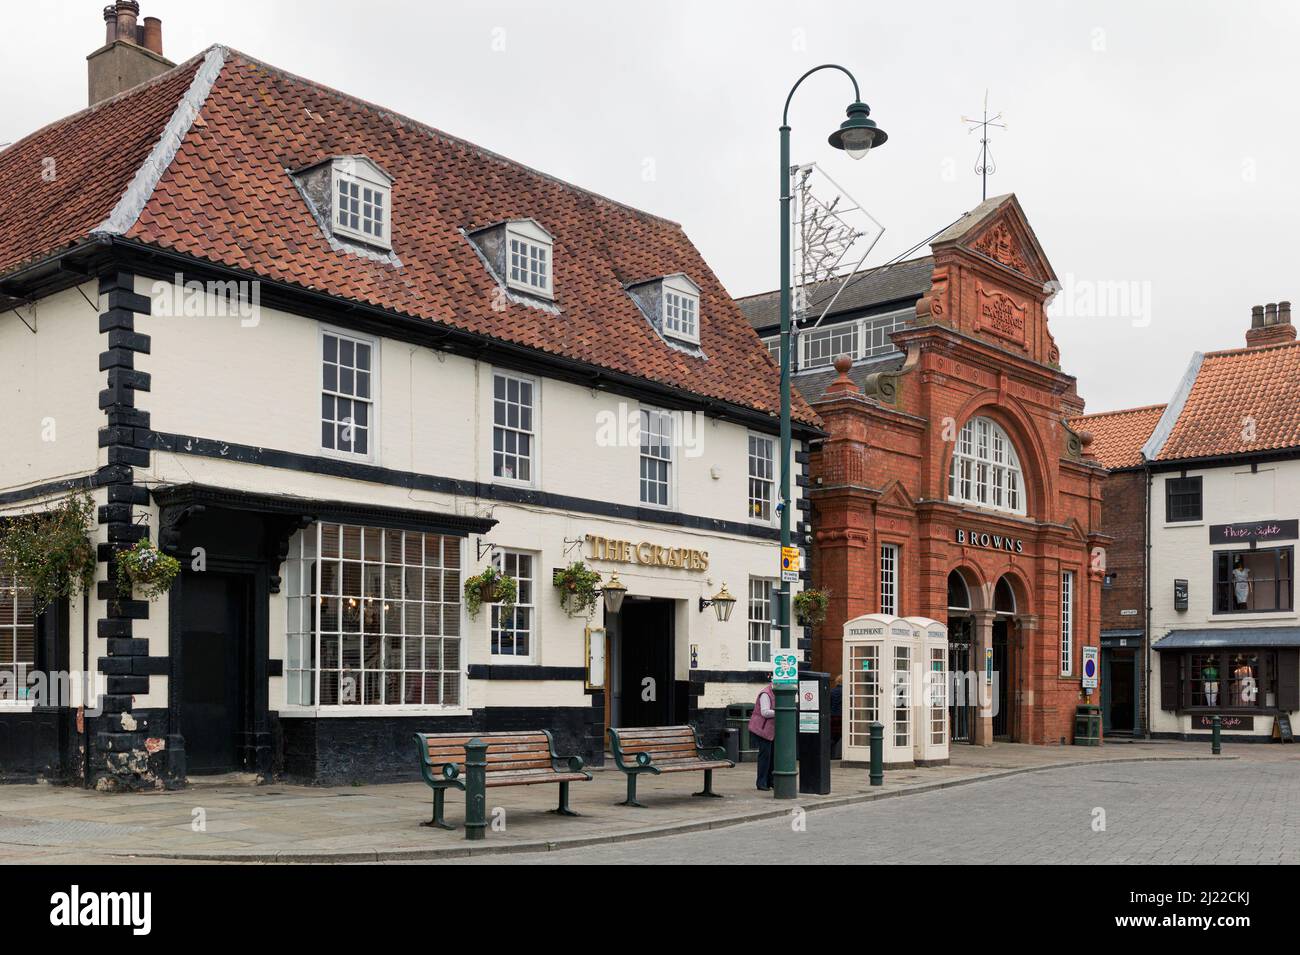 View from Saturday Market of English public house and department stores, and traditional telephone kiosks and benchs, Beverley, UK. Stock Photo